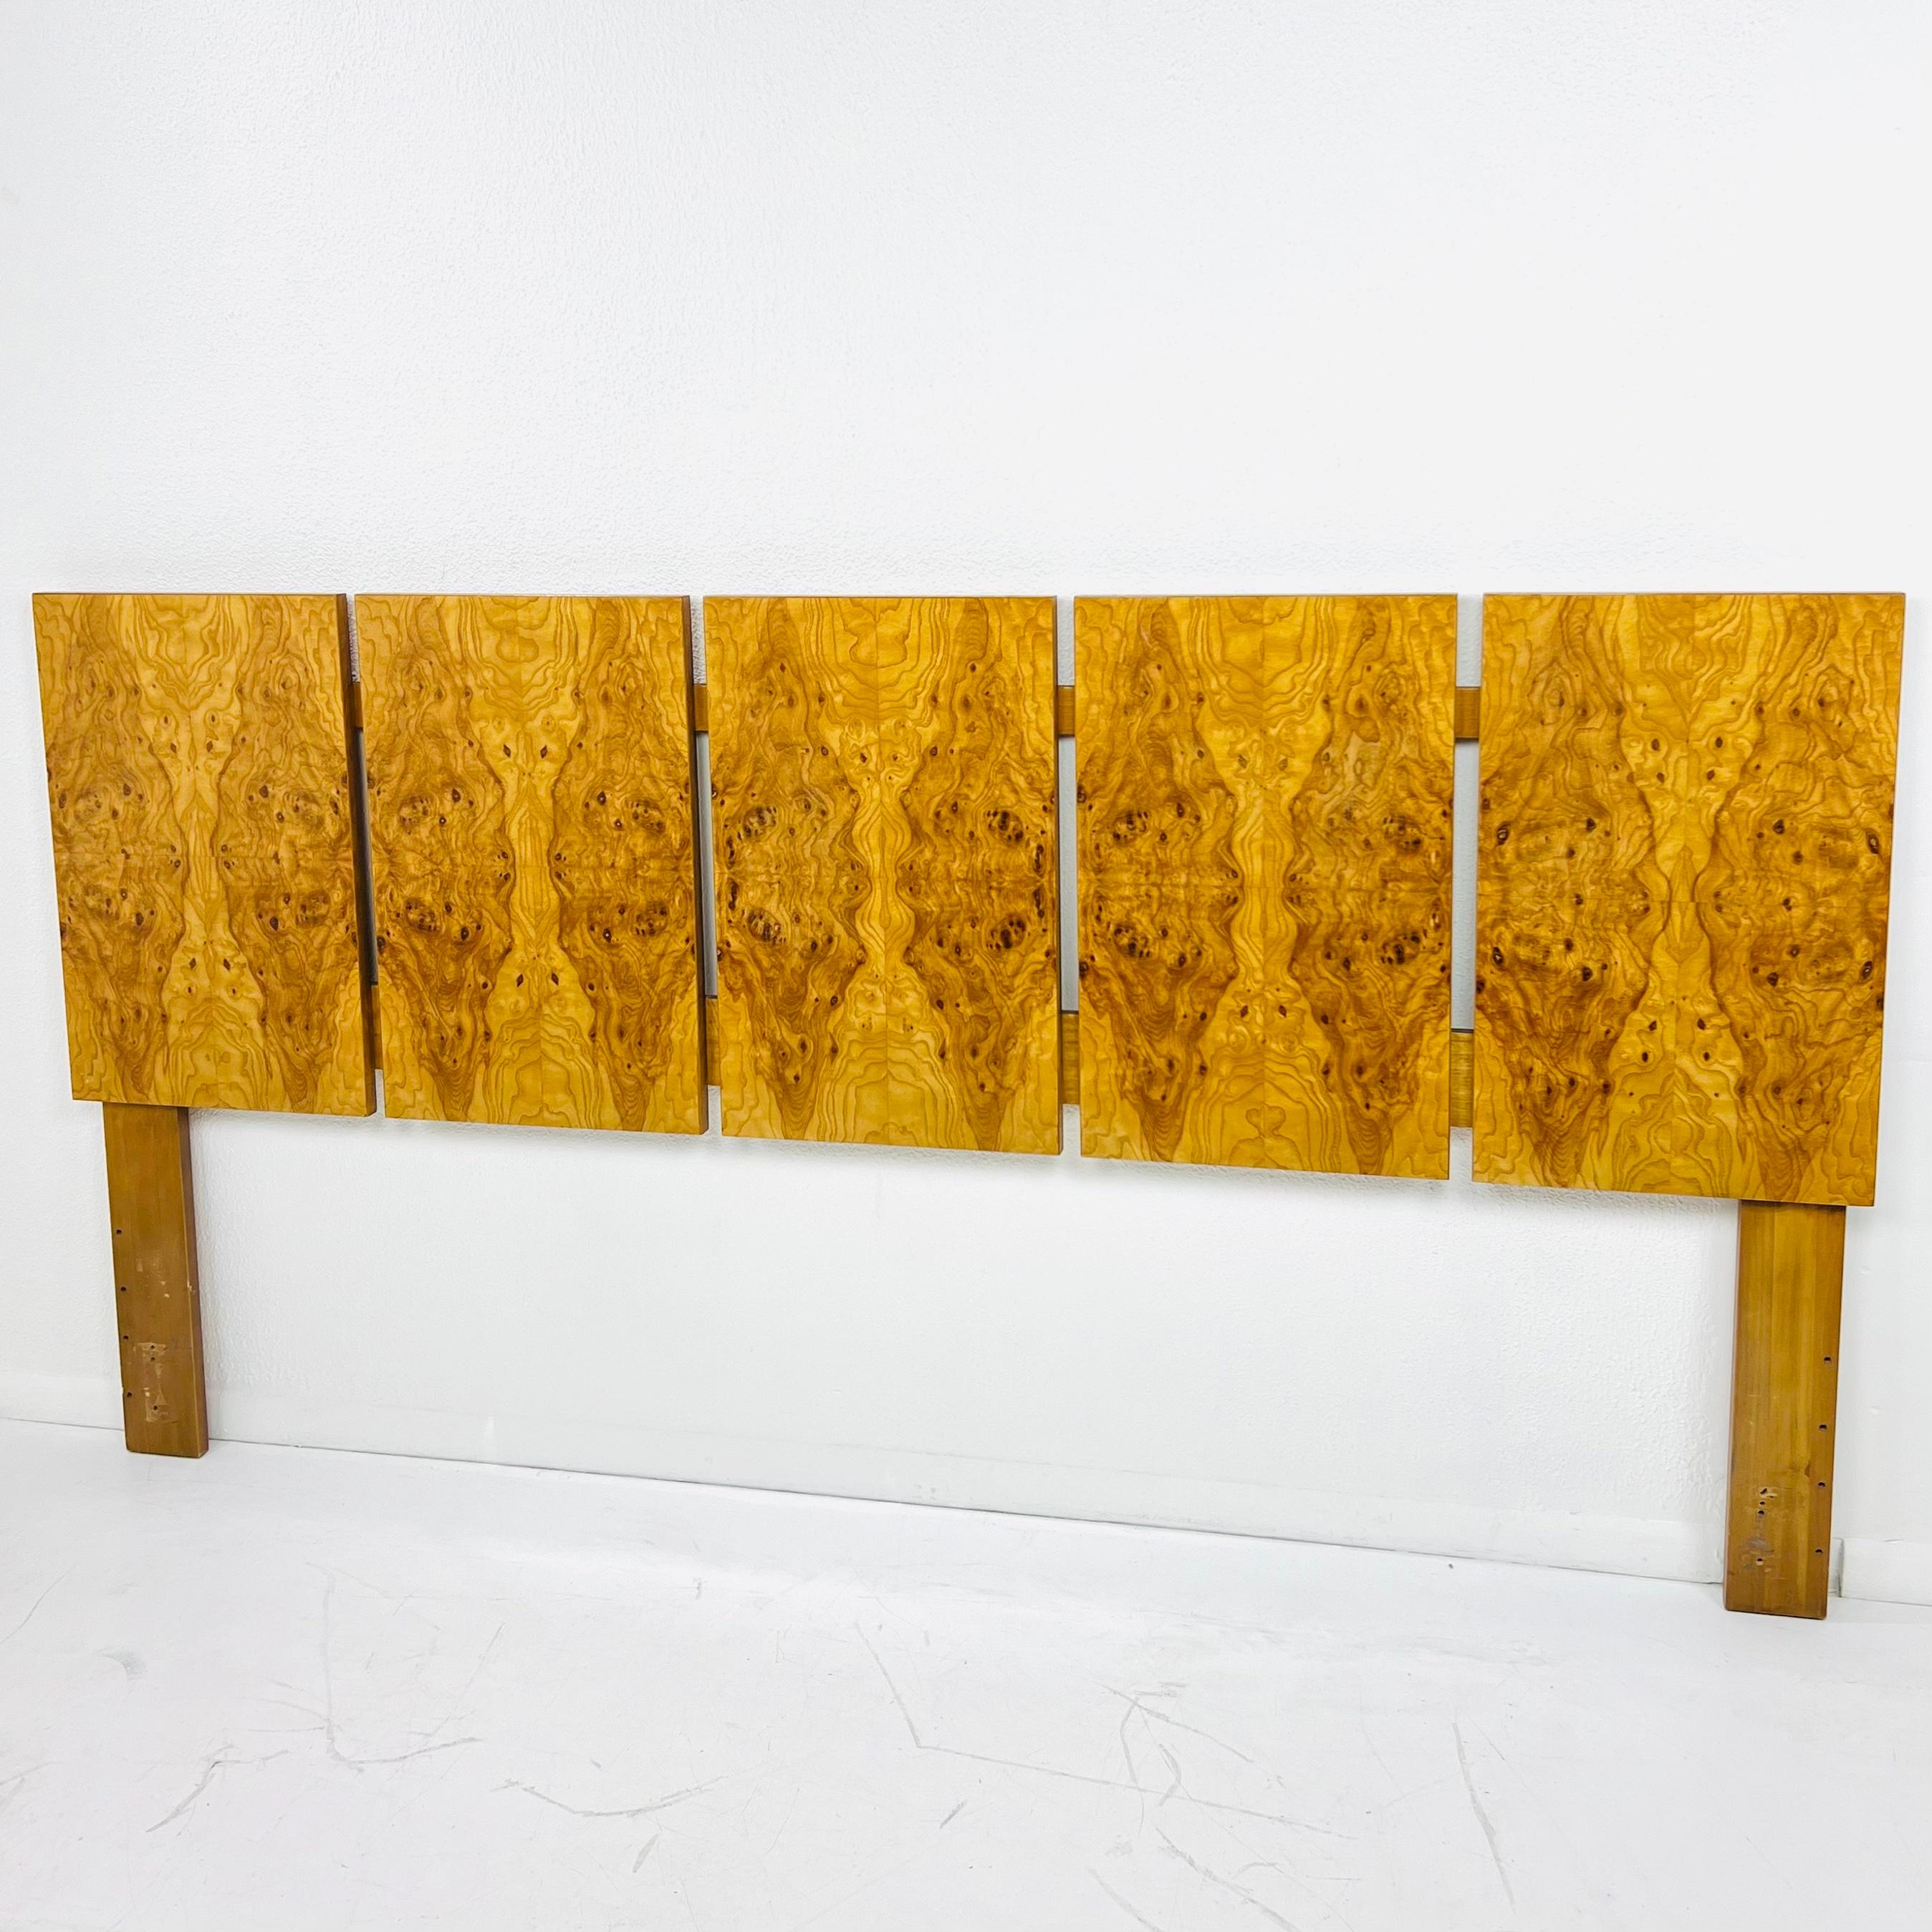 Stunning Vintage Mid-Century Modern king size burl wood headboard by Milo Baughman for Lane.

The timeless beauty of burl wood, a naturally occurring wood pattern, and clean modernist lines make this headboard a standout. Good vintage condition with